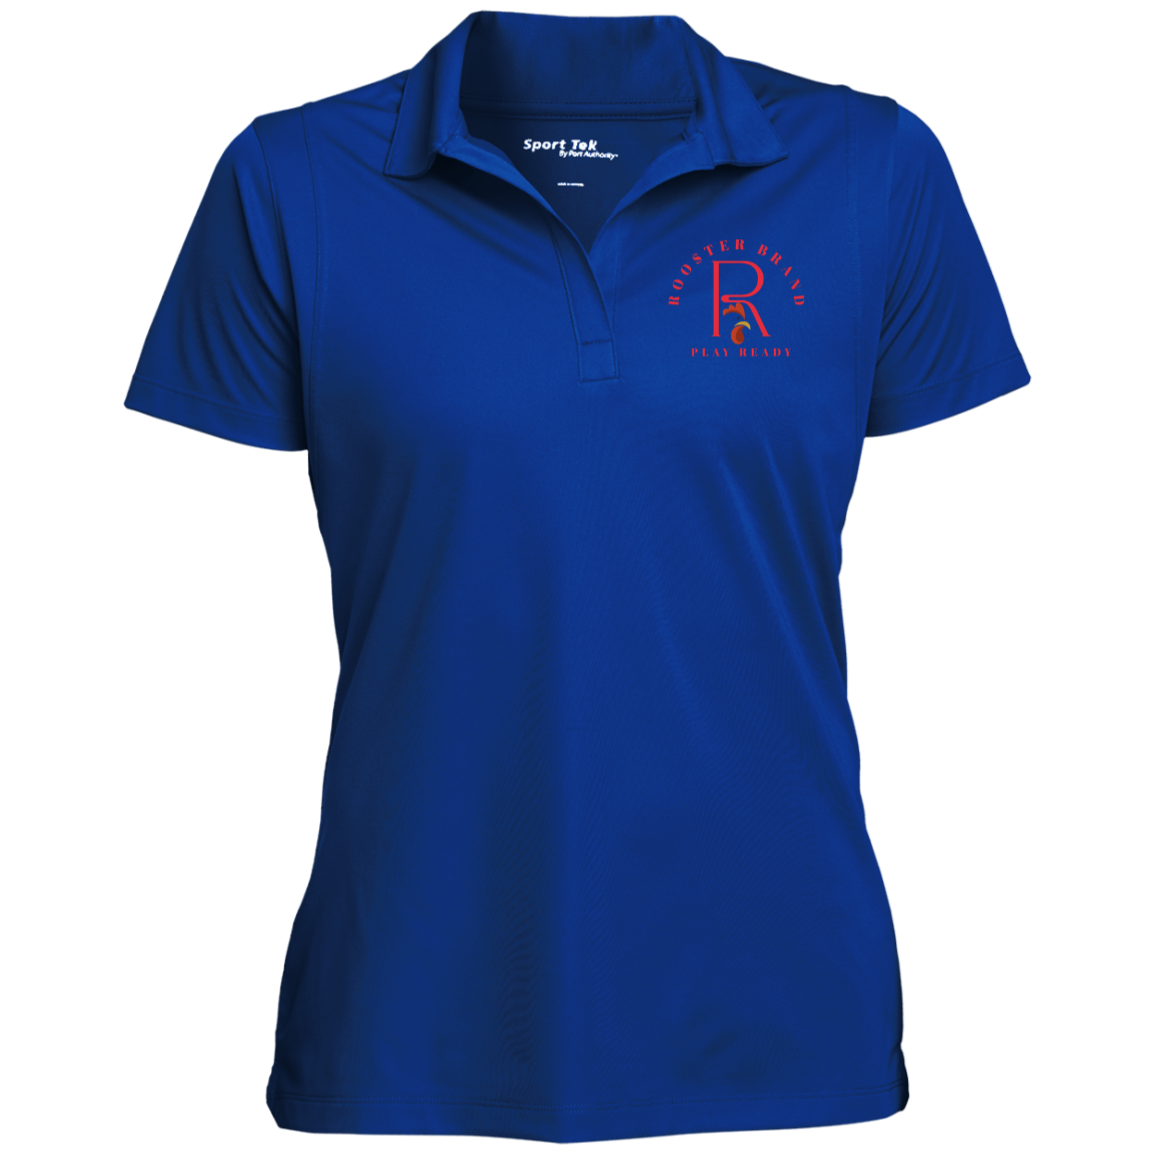 Roo$ter Brand Ladies' Micropique Sport-Wick® Polo